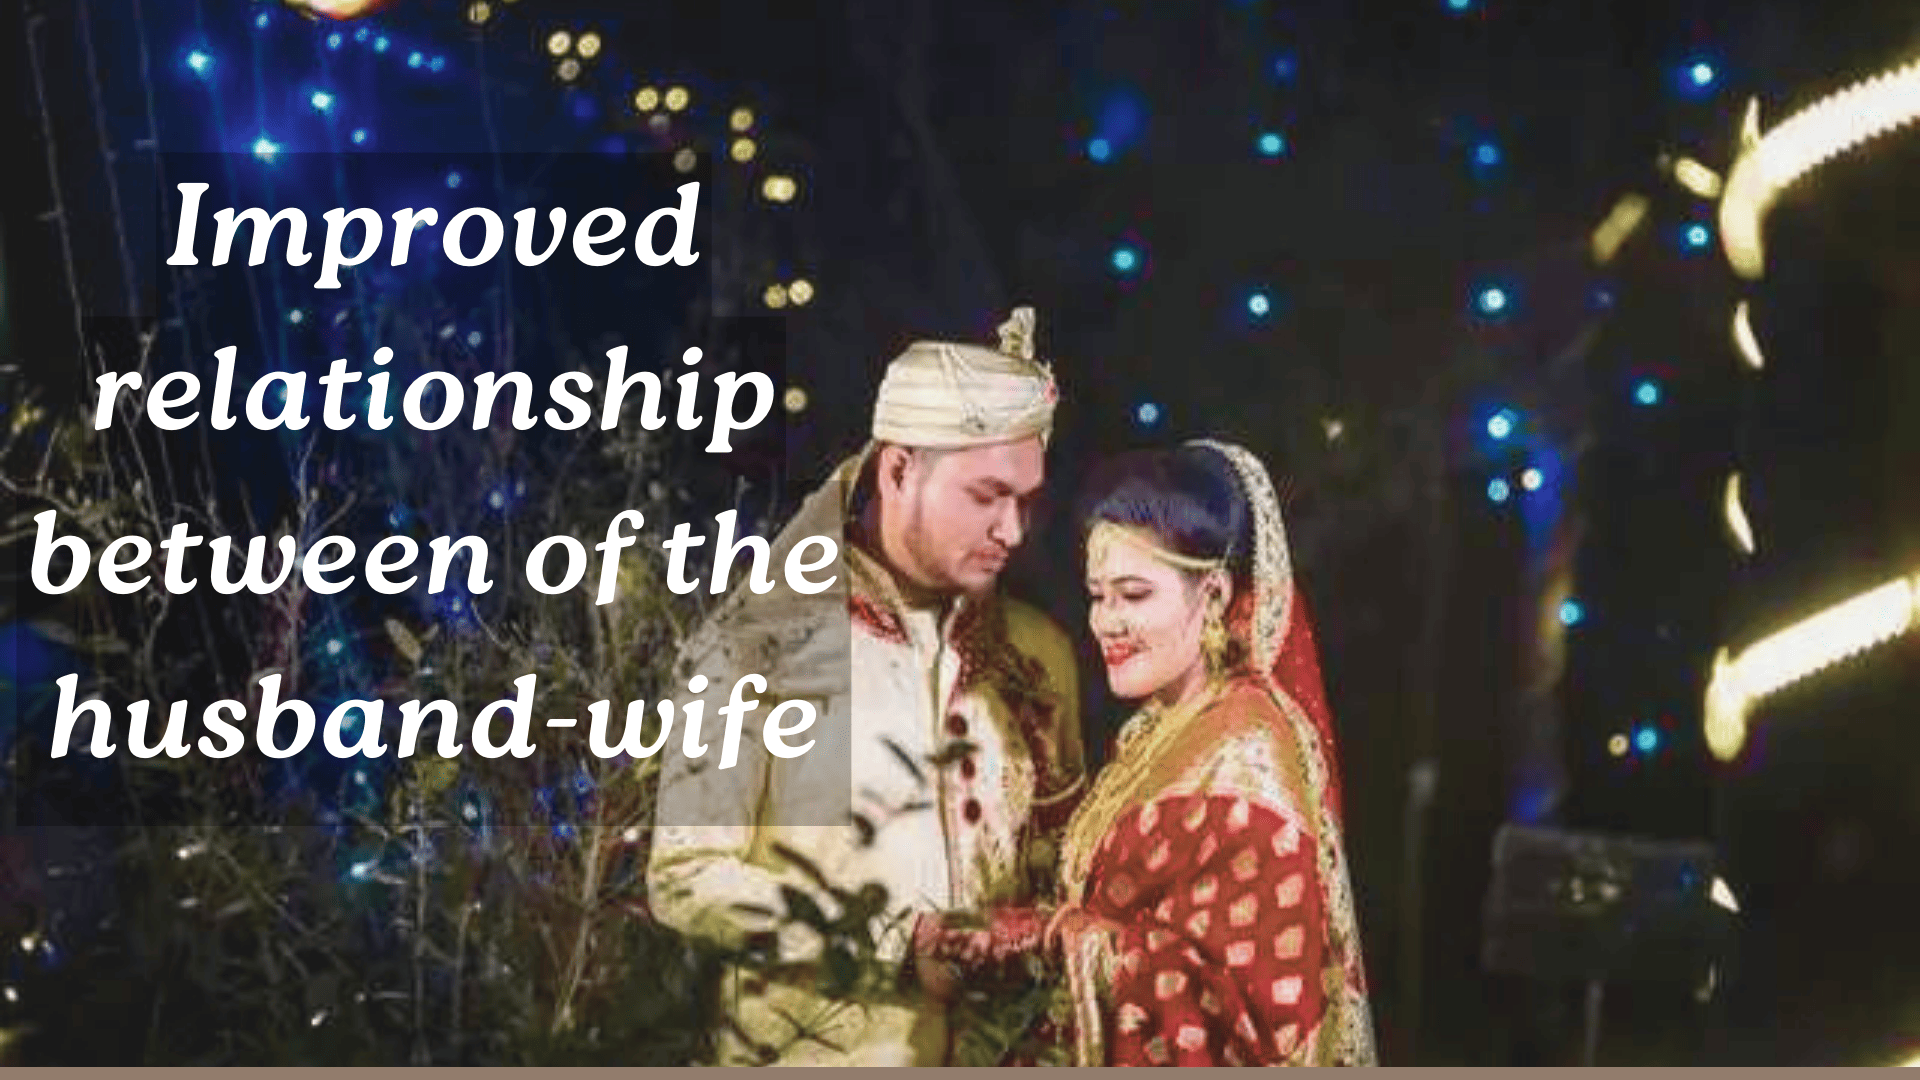 Improved relationship between of the husband-wife